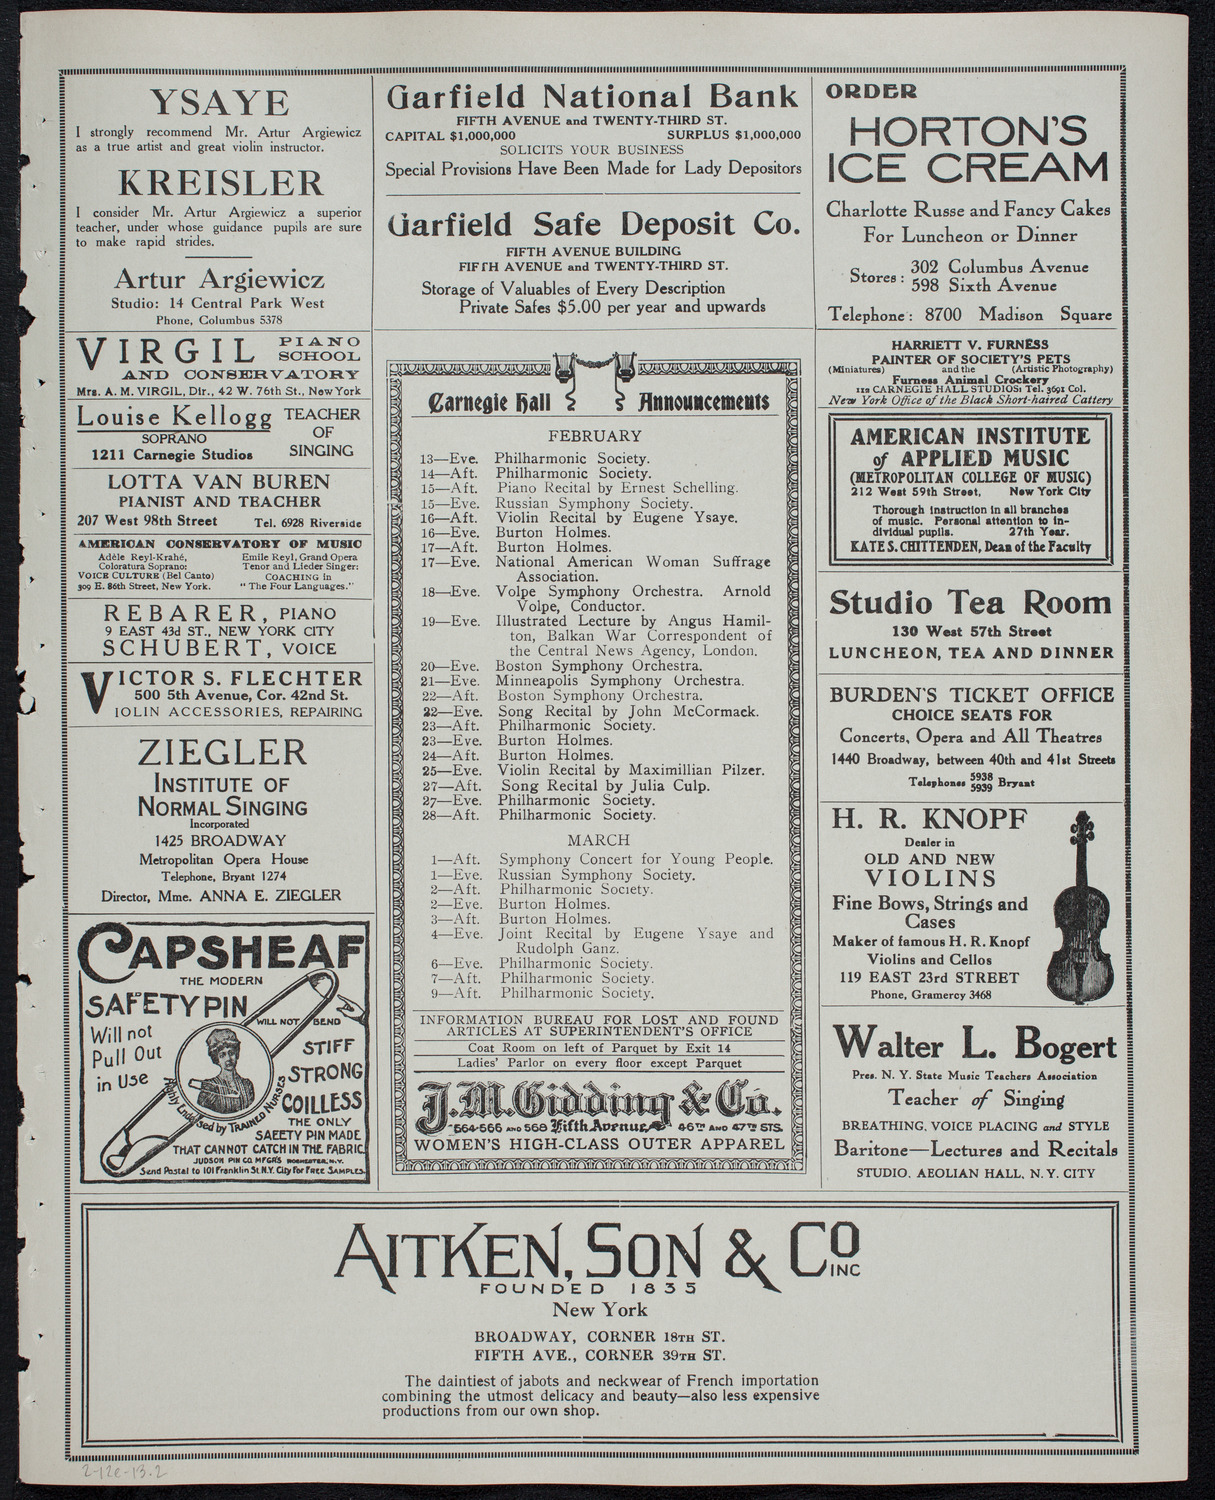 Clef Club Orchestra / Benefit: Music School Settlement for Colored People of the City of New York, February 12, 1913, program page 3